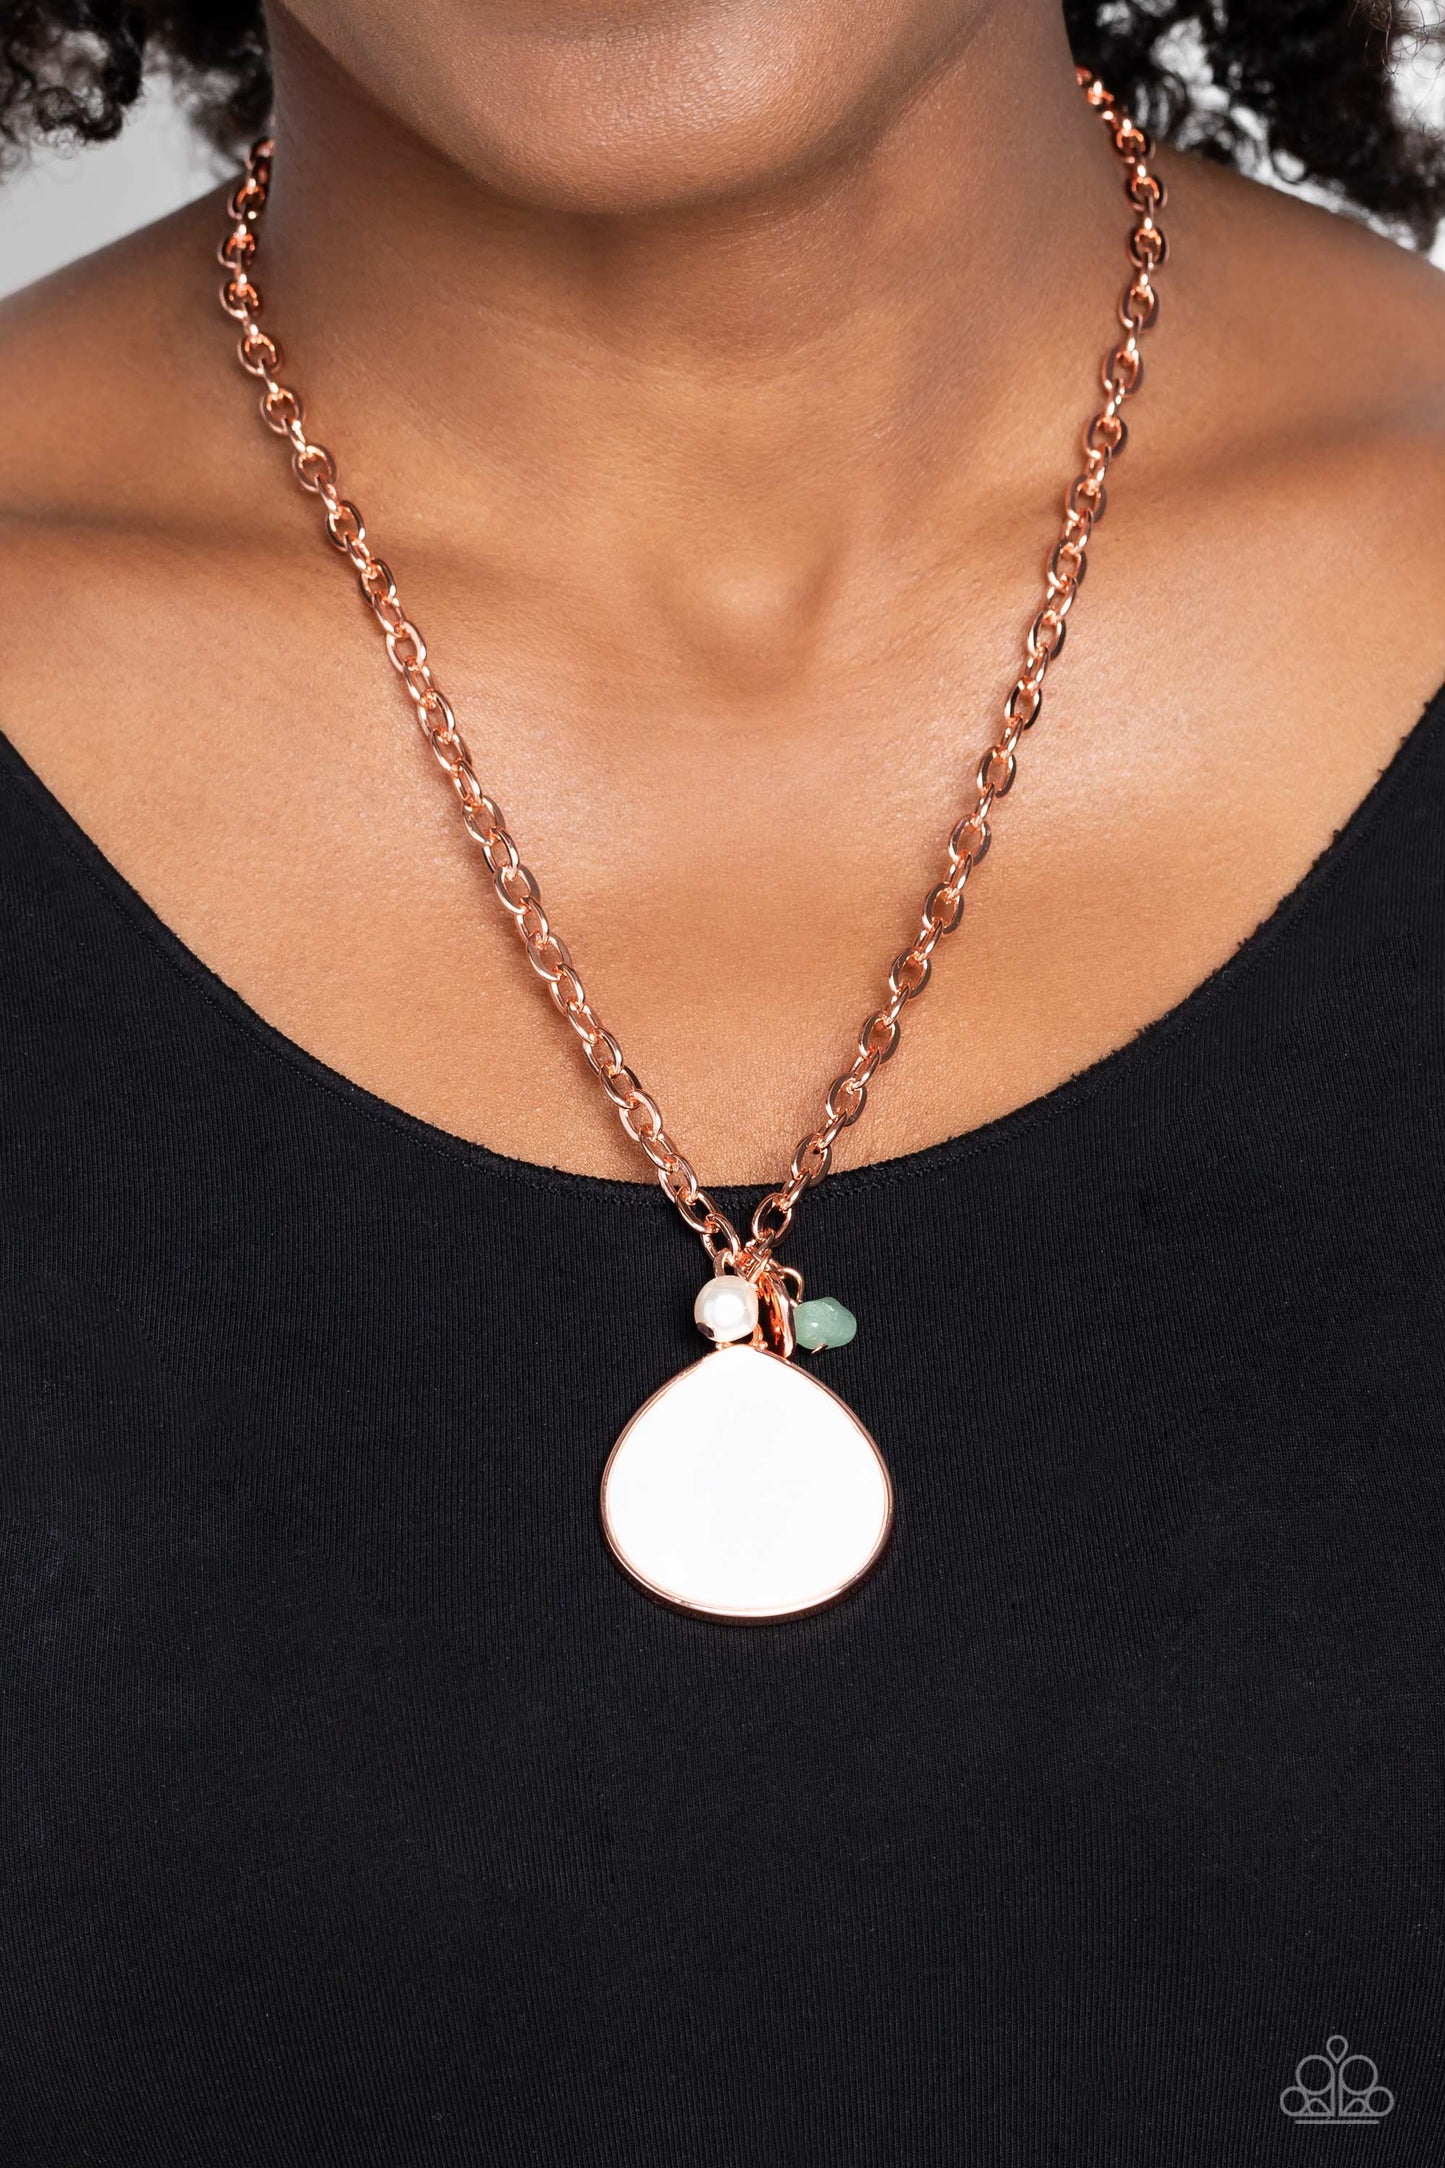 I Put A SHELL On You - Copper Chain/White Pearl Pendant Paparazzi Necklace & matching earrings